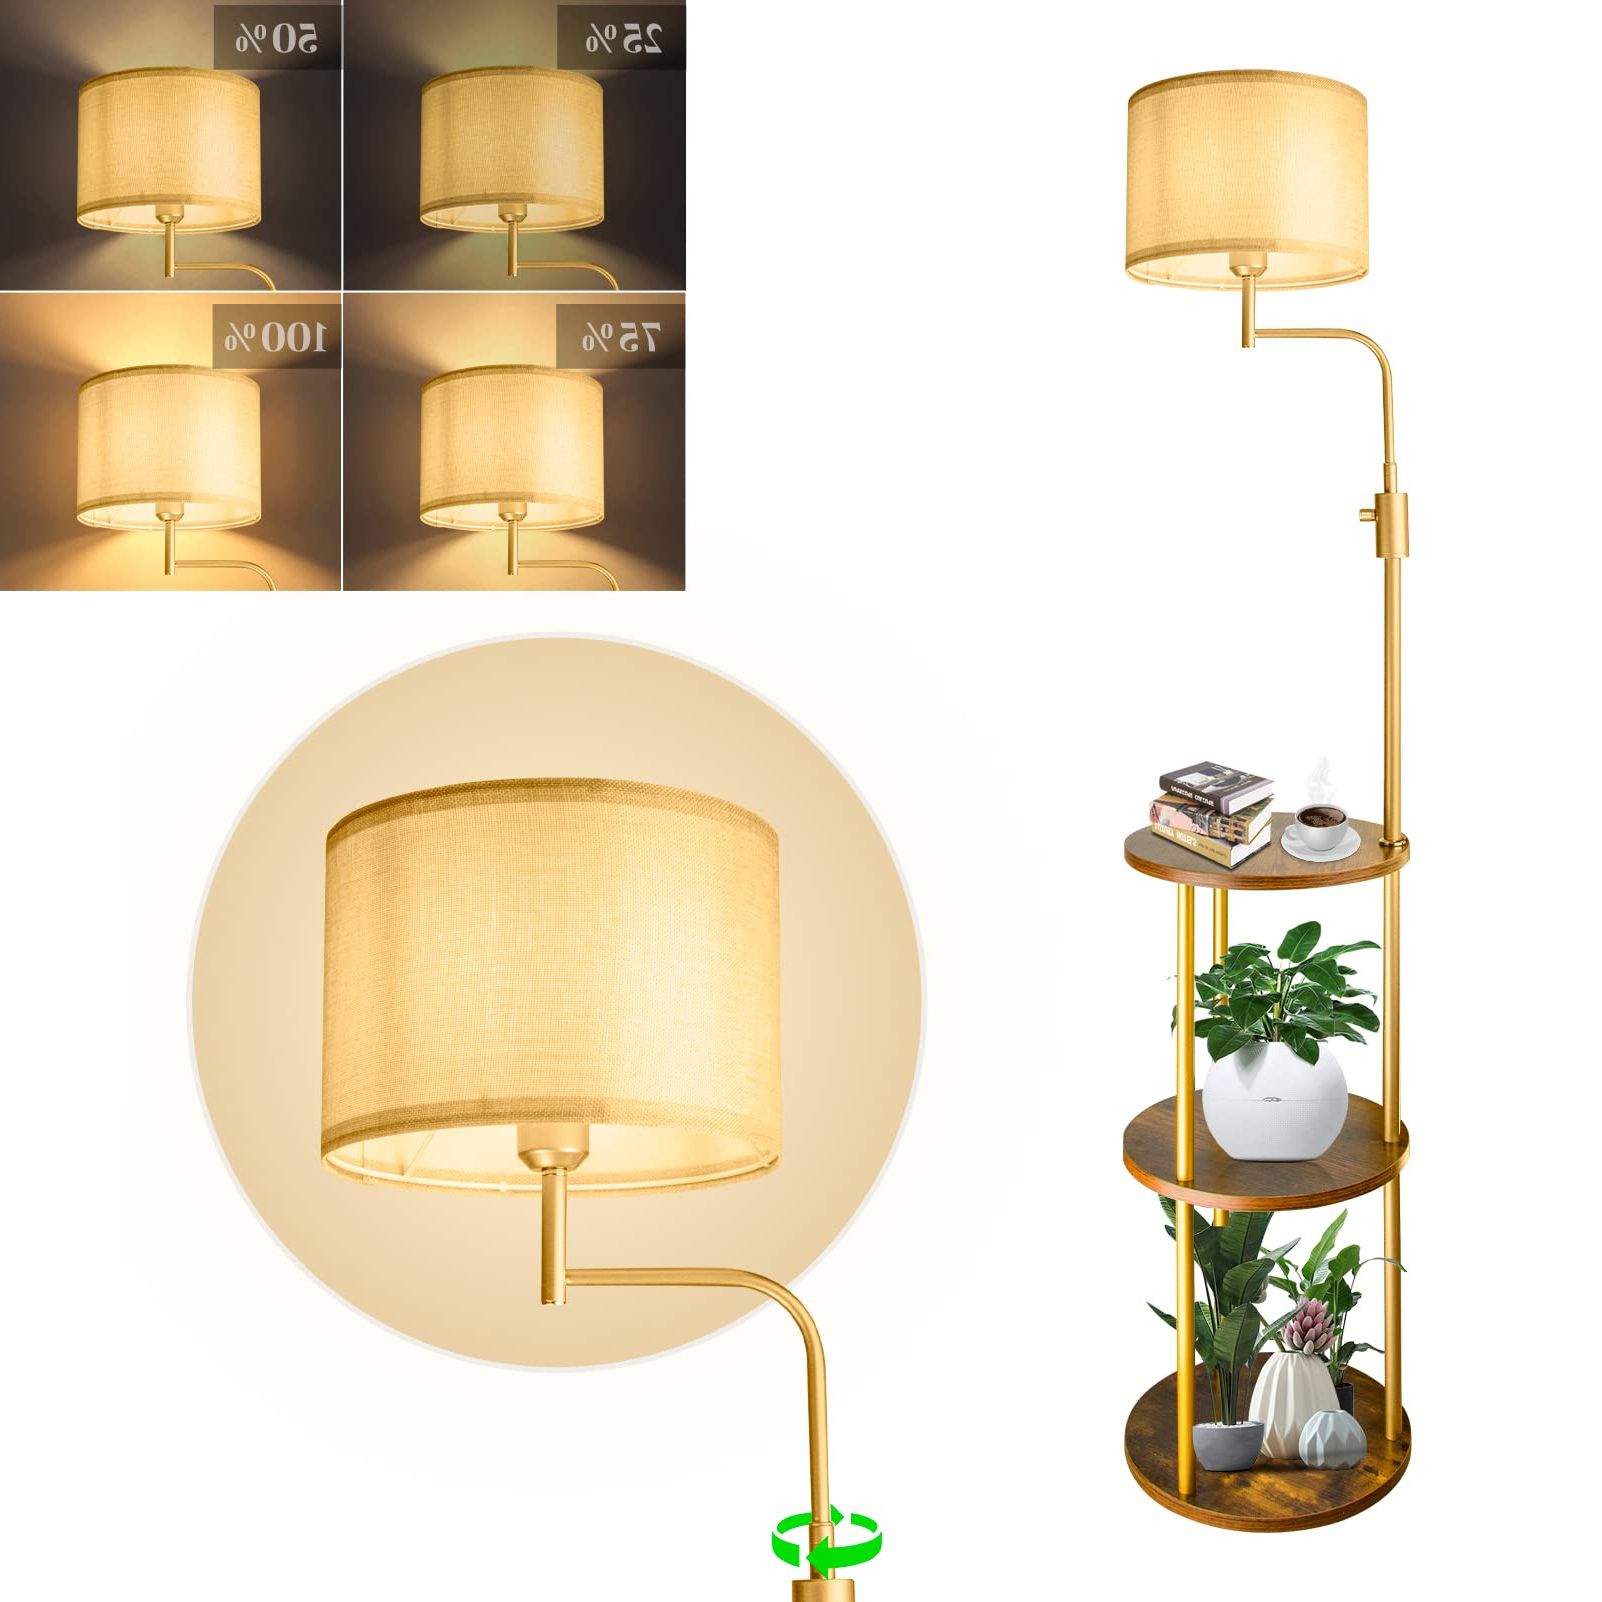 [%dimmable Floor Lamp With Shelves,3 Tier Round Shelf Floor Lamps With  Adjustable Direction,0% 100% Stepless Dimming, Storage Wood Texture,linen  Shade,display Standing Lamp For Living Room, Bedroom – – Amazon Regarding Well Known Textured Linen Standing Lamps|textured Linen Standing Lamps Regarding Fashionable Dimmable Floor Lamp With Shelves,3 Tier Round Shelf Floor Lamps With  Adjustable Direction,0% 100% Stepless Dimming, Storage Wood Texture,linen  Shade,display Standing Lamp For Living Room, Bedroom – – Amazon|widely Used Textured Linen Standing Lamps Within Dimmable Floor Lamp With Shelves,3 Tier Round Shelf Floor Lamps With  Adjustable Direction,0% 100% Stepless Dimming, Storage Wood Texture,linen  Shade,display Standing Lamp For Living Room, Bedroom – – Amazon|2020 Dimmable Floor Lamp With Shelves,3 Tier Round Shelf Floor Lamps With  Adjustable Direction,0% 100% Stepless Dimming, Storage Wood Texture,linen  Shade,display Standing Lamp For Living Room, Bedroom – – Amazon Within Textured Linen Standing Lamps%] (View 5 of 15)